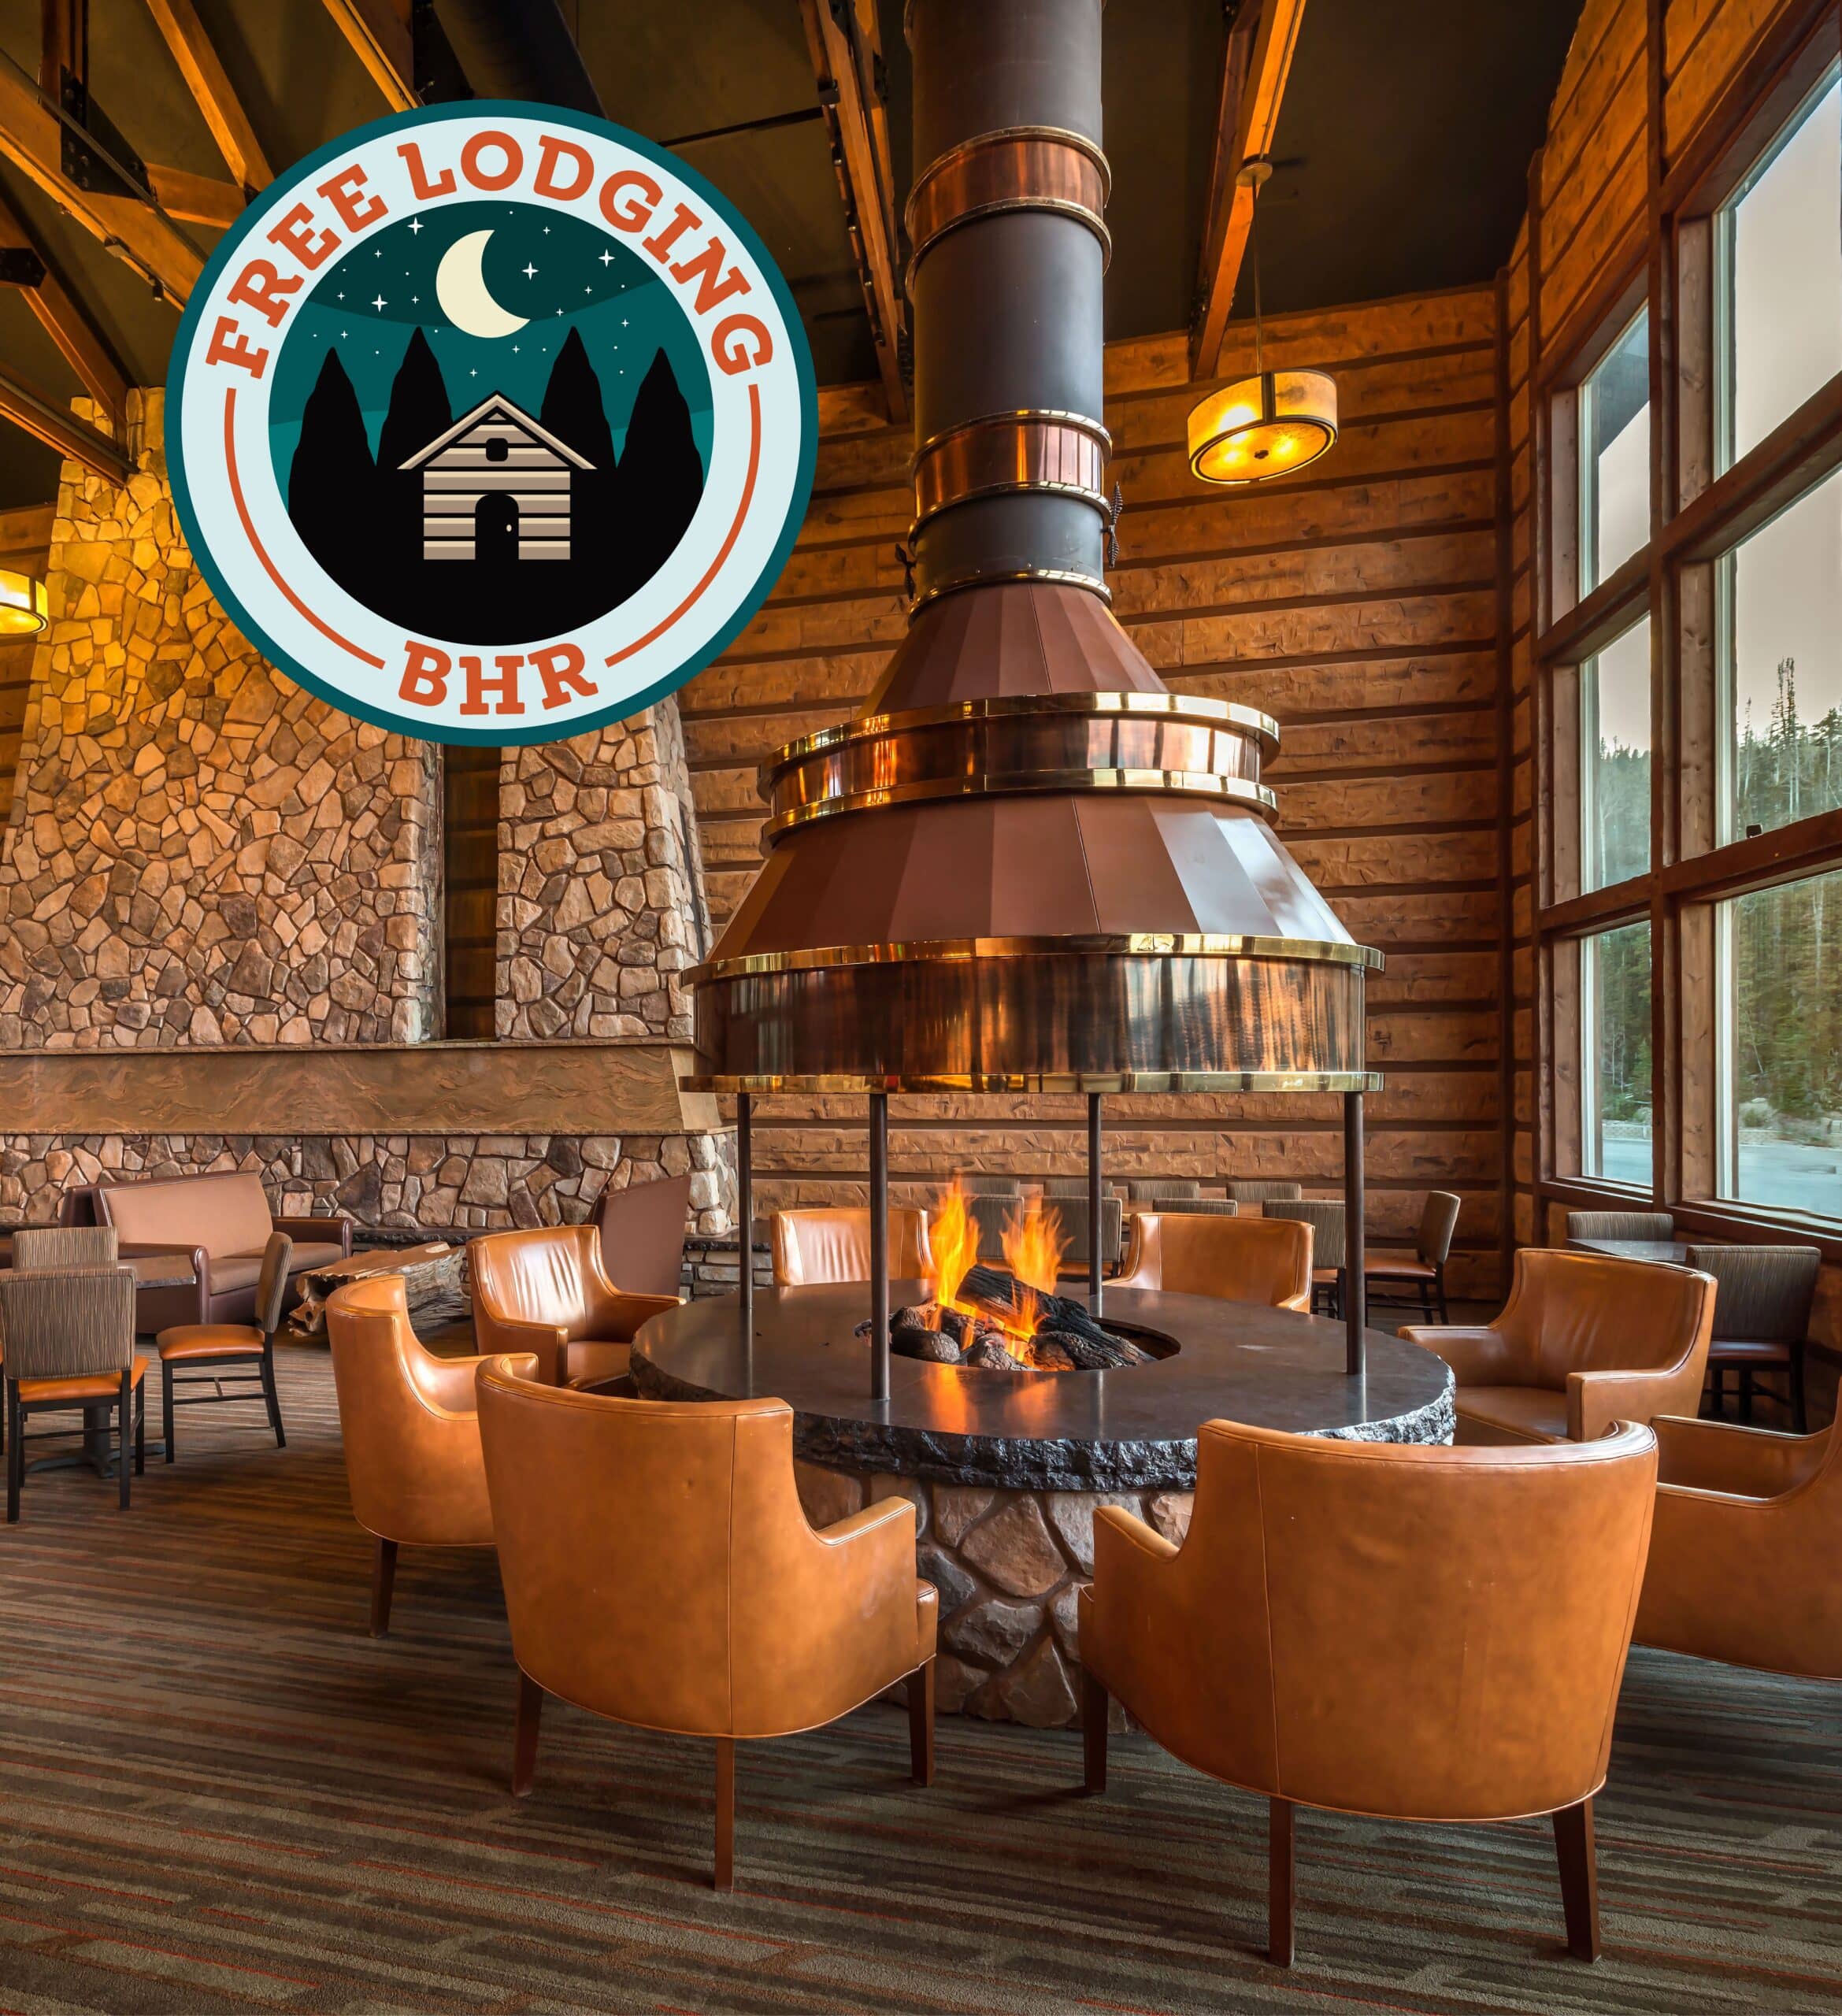 Free Lodging at Brian Head Lodge indoor fire pit